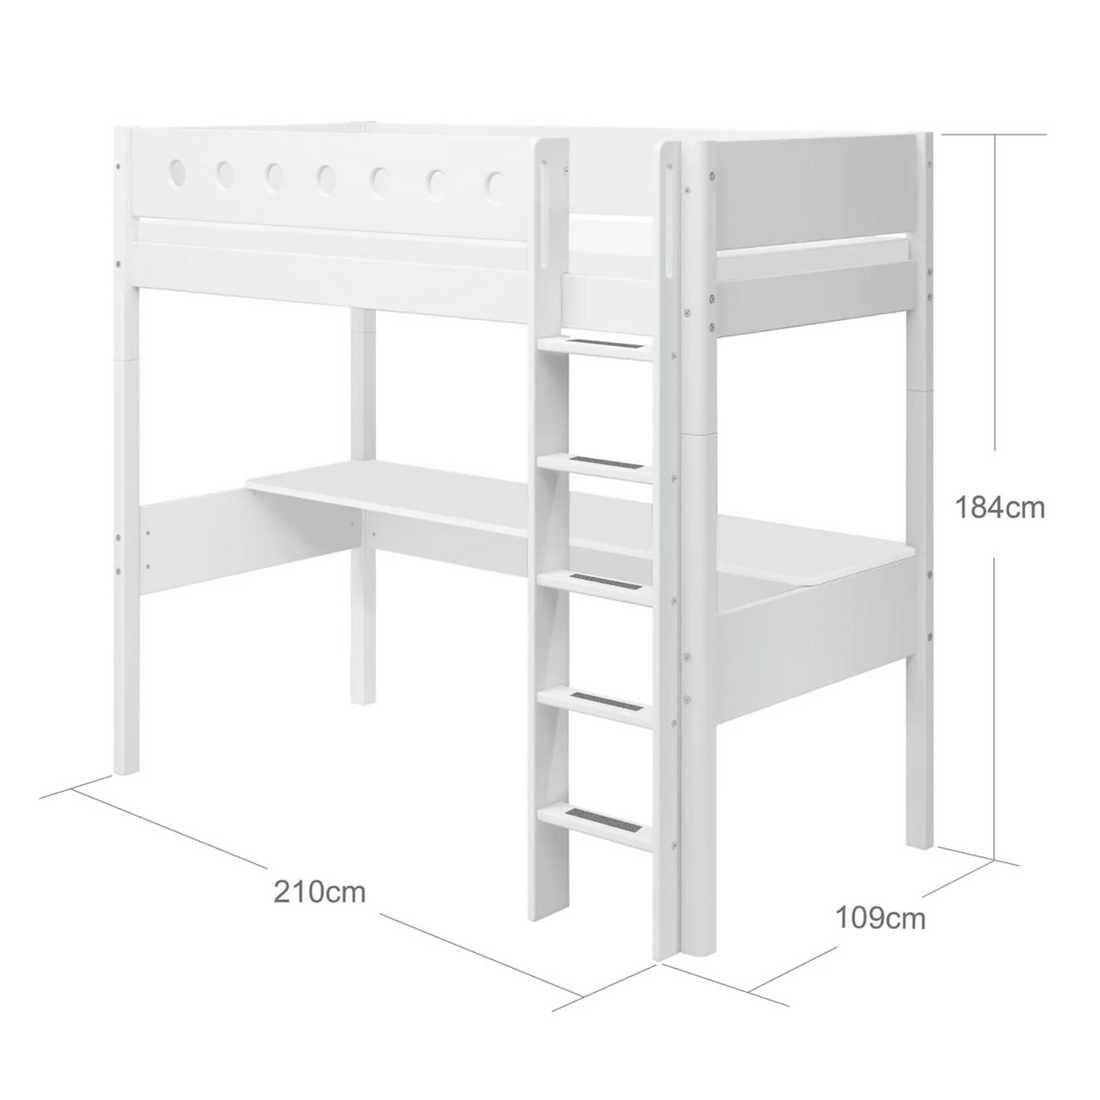 High bed w. straight ladder and desk dimensions